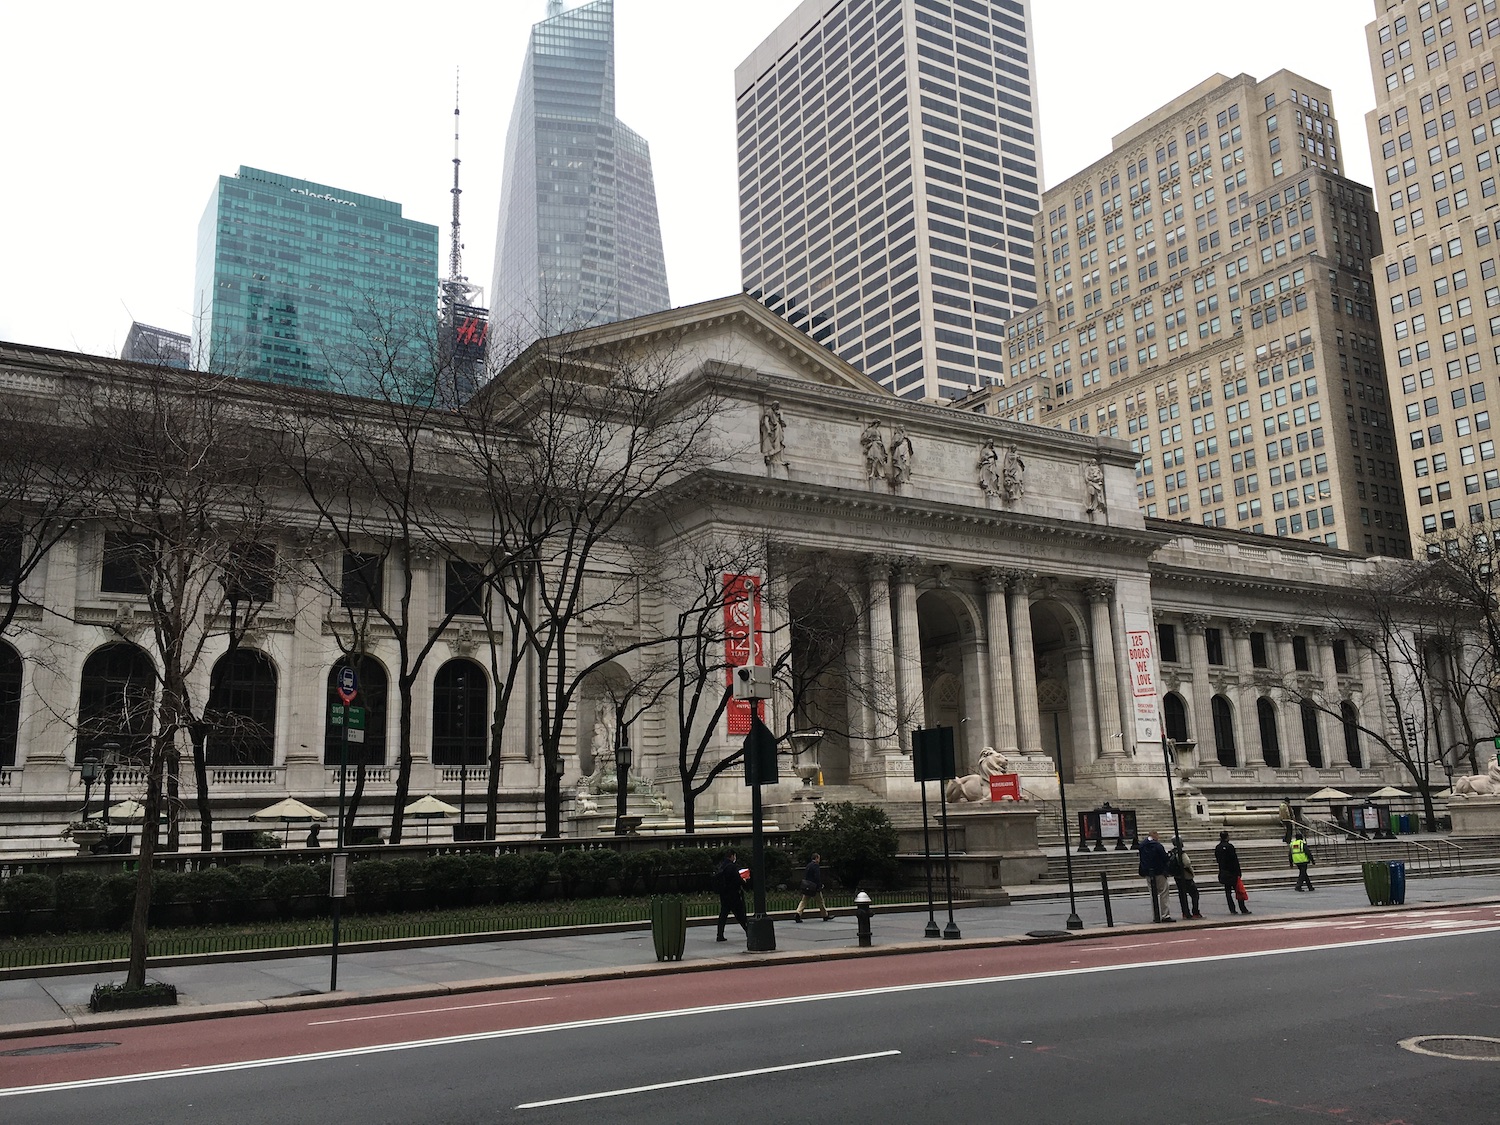 The usually crowded public library near Bryant Park is almost empty.